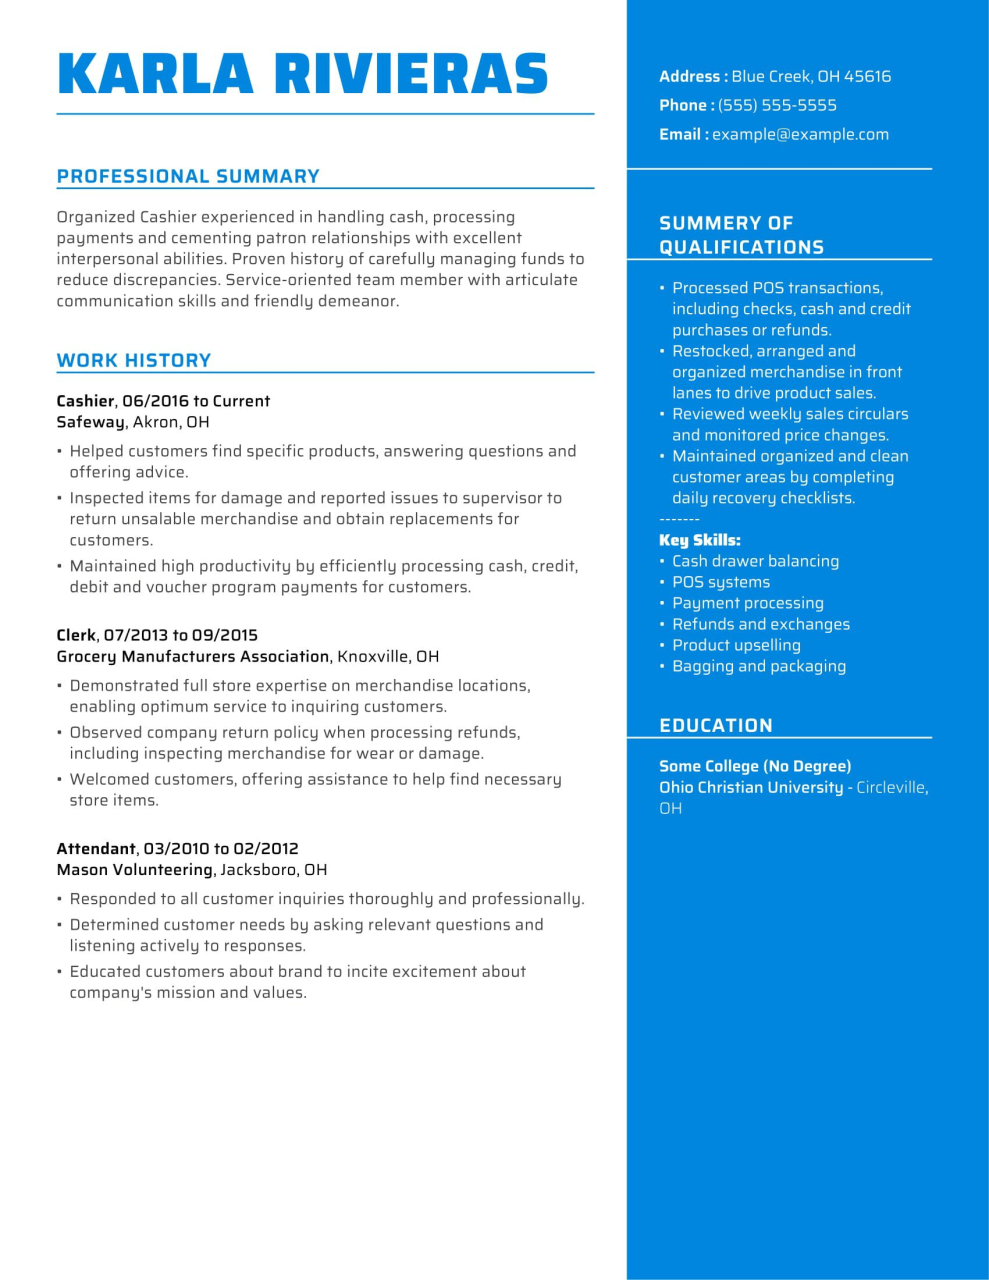 Professional Cashier Resume Examples Retail LiveCareer